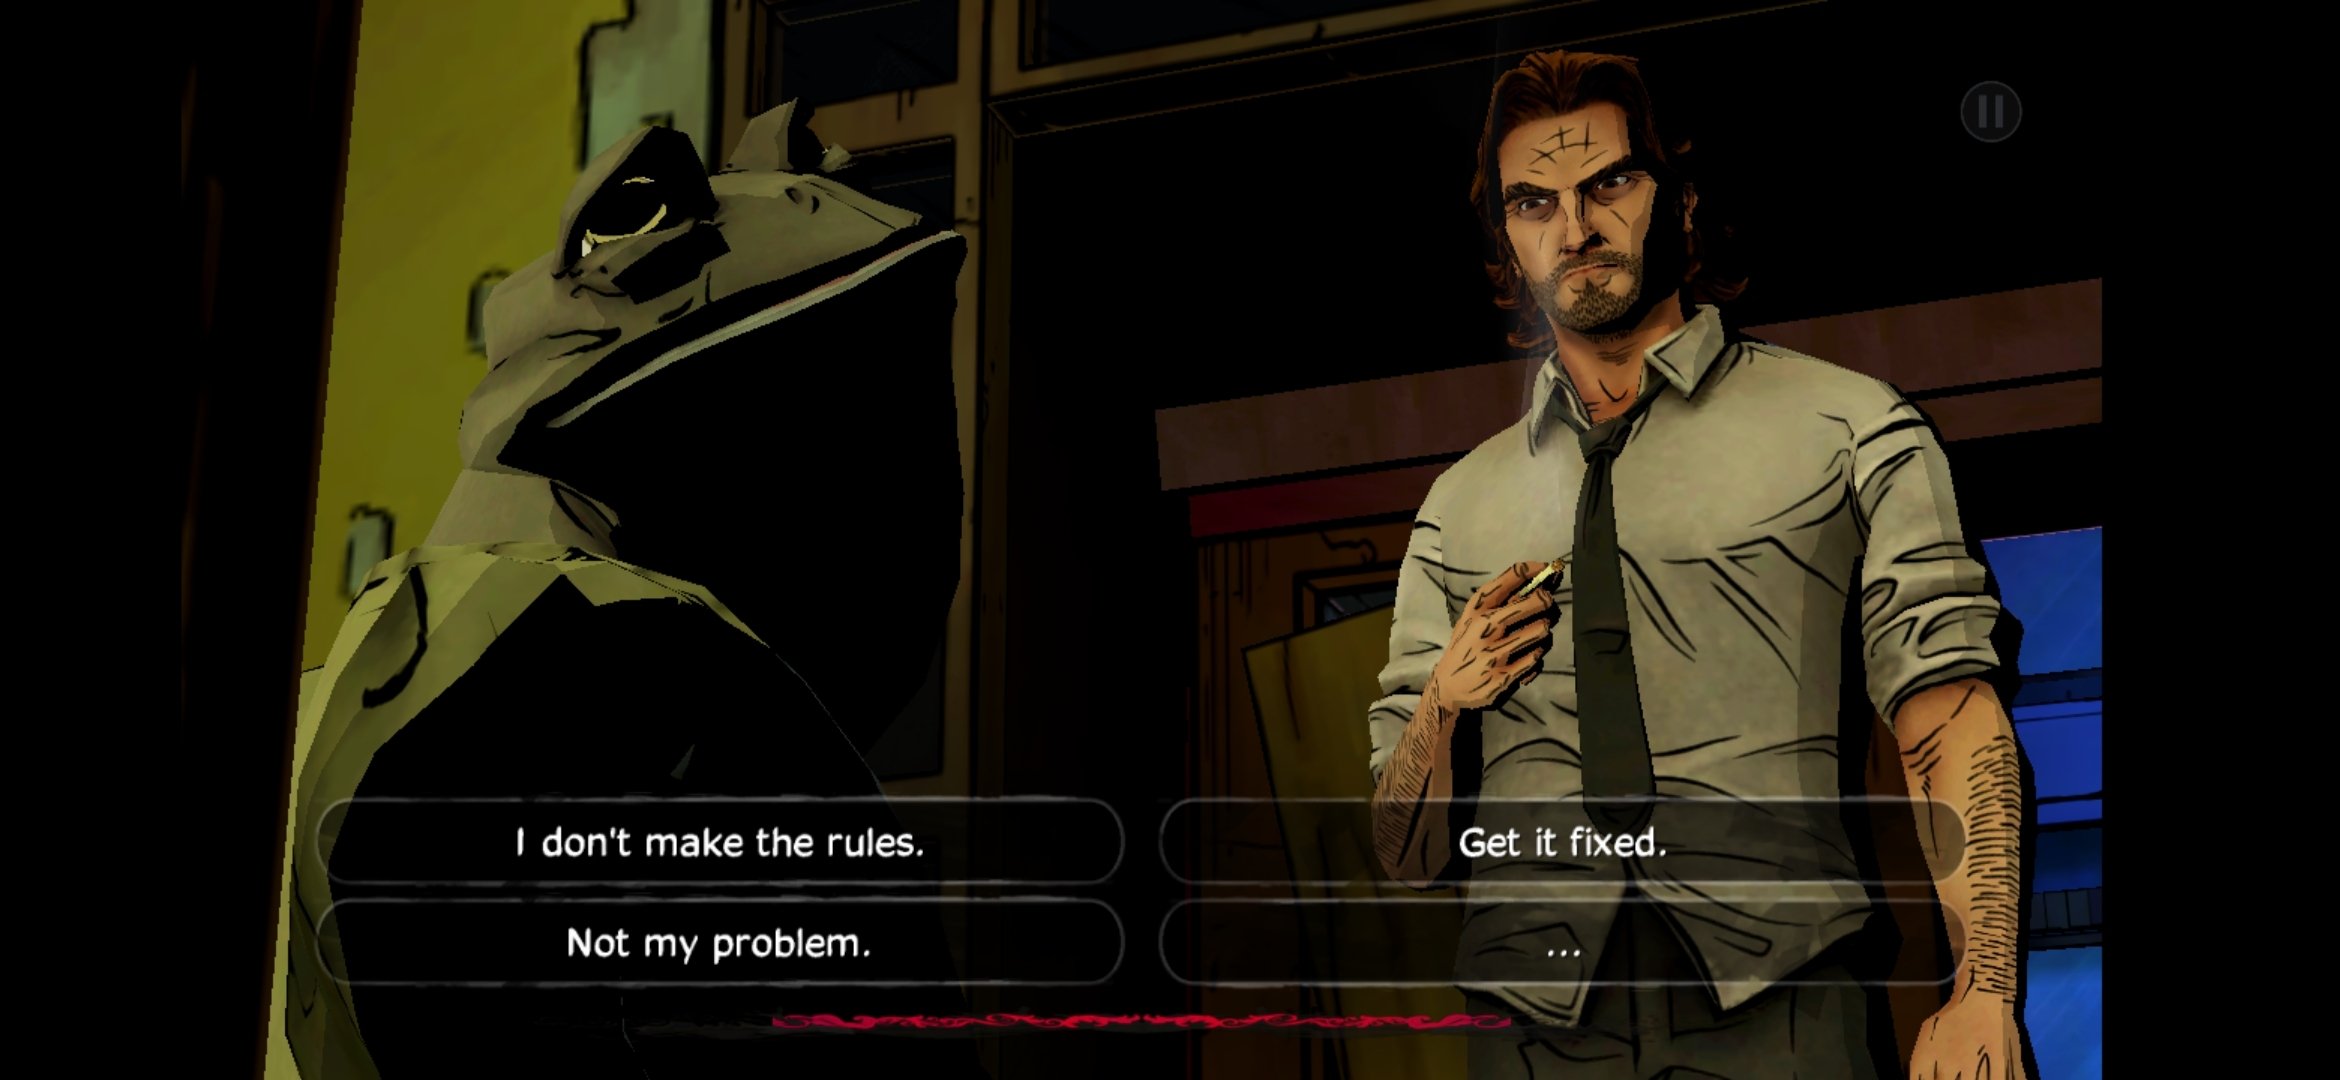 instal the last version for windows The Wolf Among Us